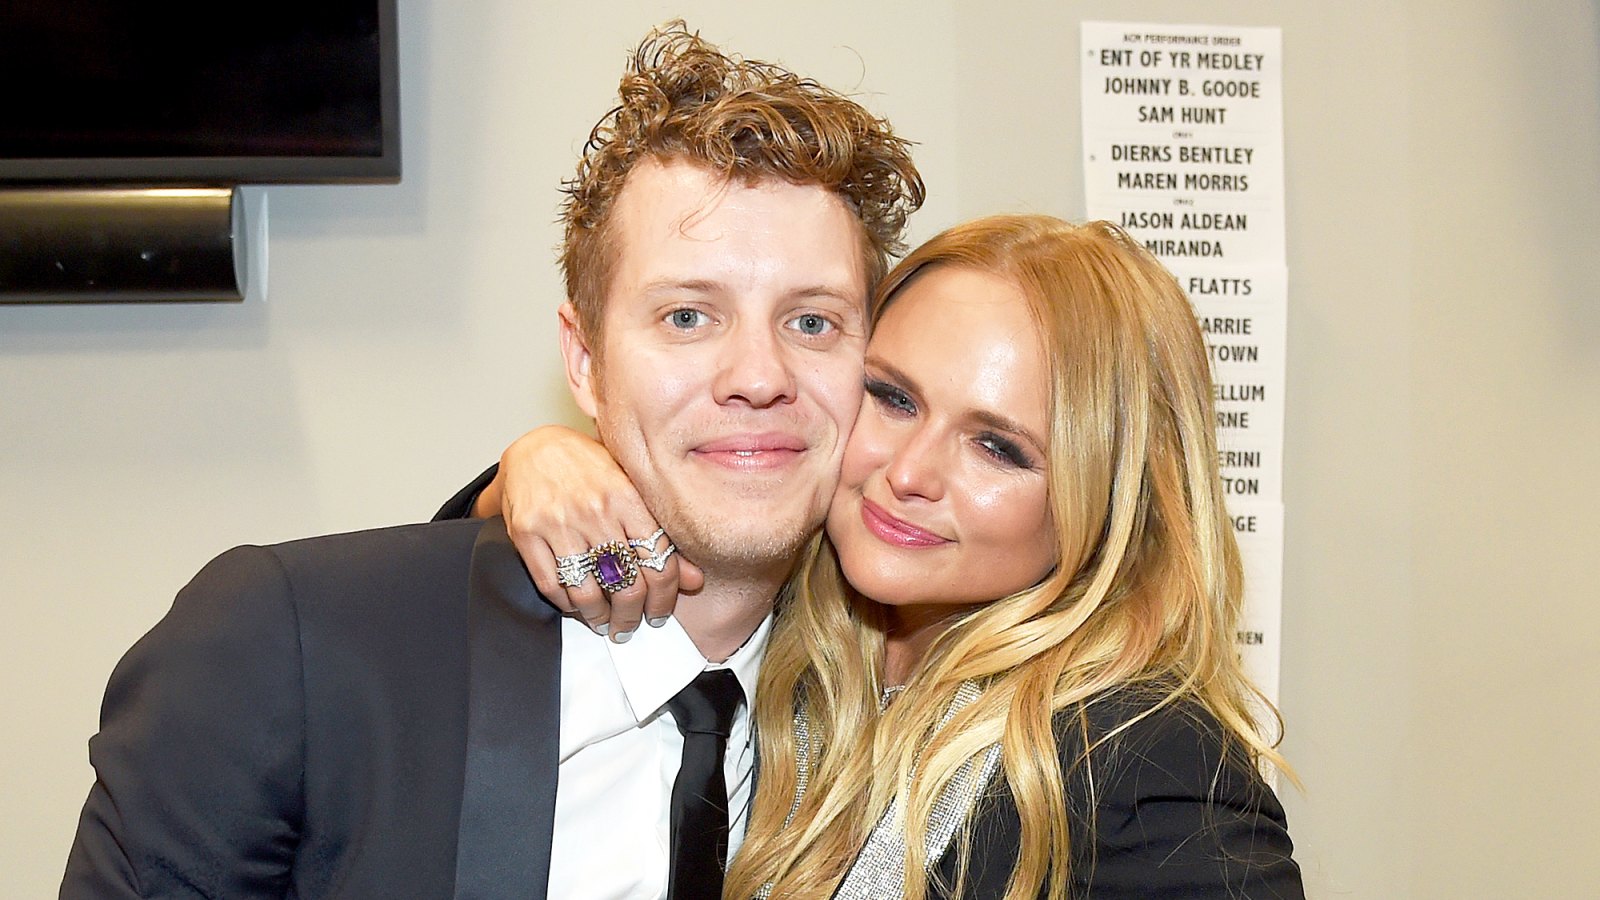 Anderson East and Miranda Lambert attends the 52nd Academy Of Country Music Awards at T-Mobile Arena in Las Vegas, Nevada.